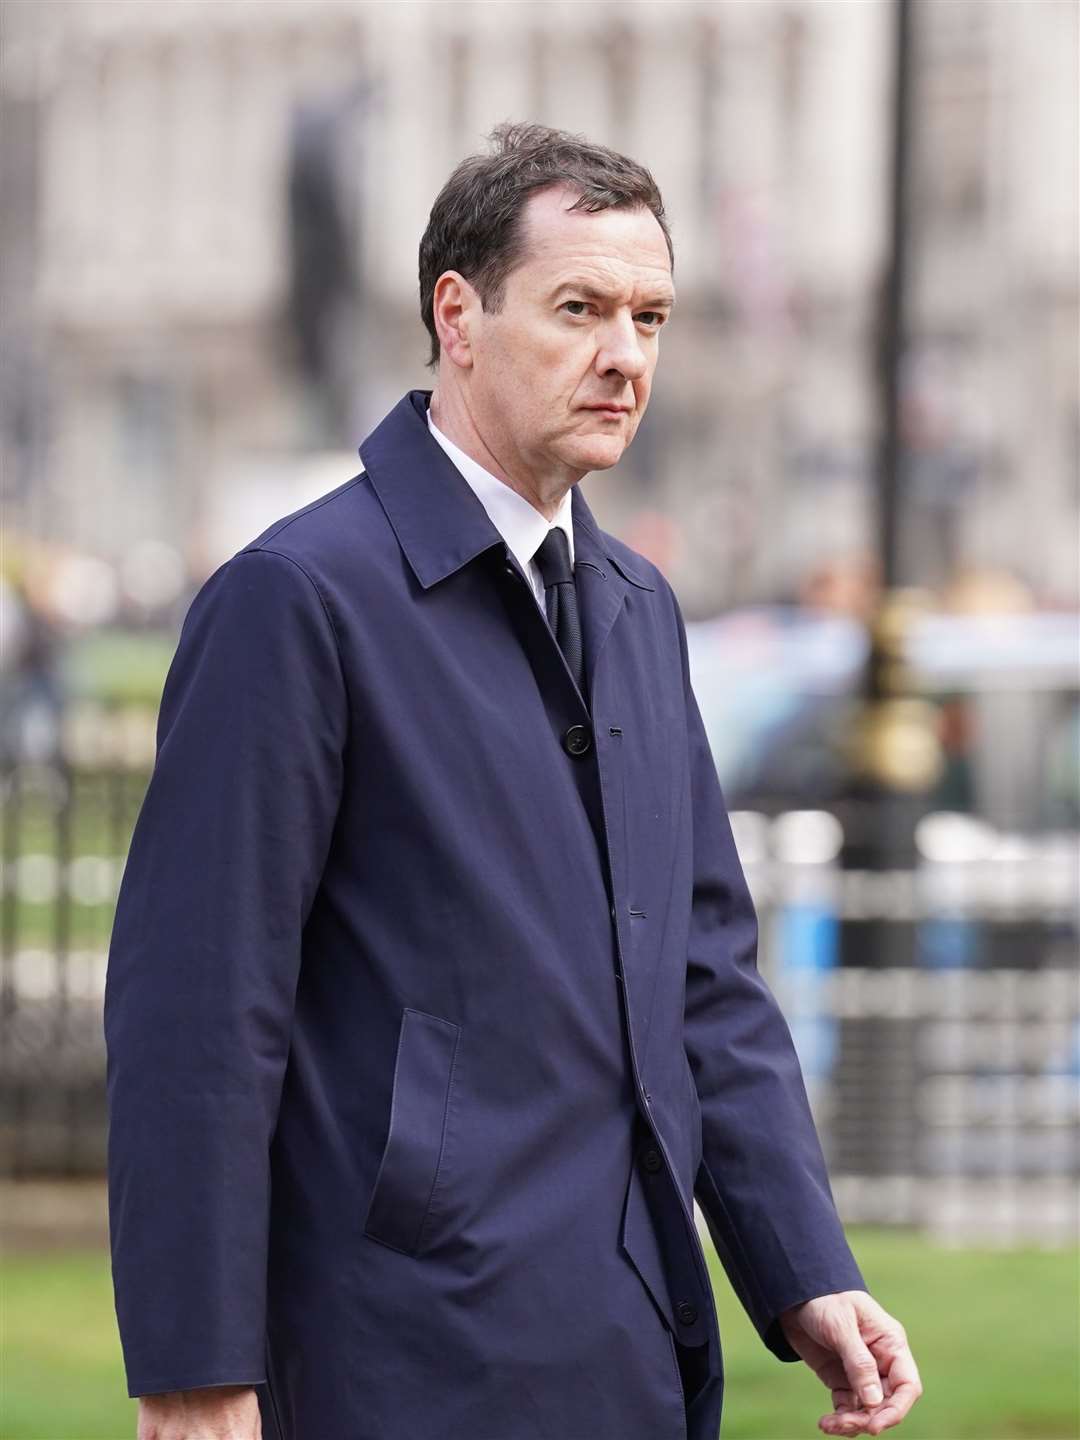 Former chancellor George Osborne attended the memorial service for Lord Lawson (Stefan Rousseau/PA)